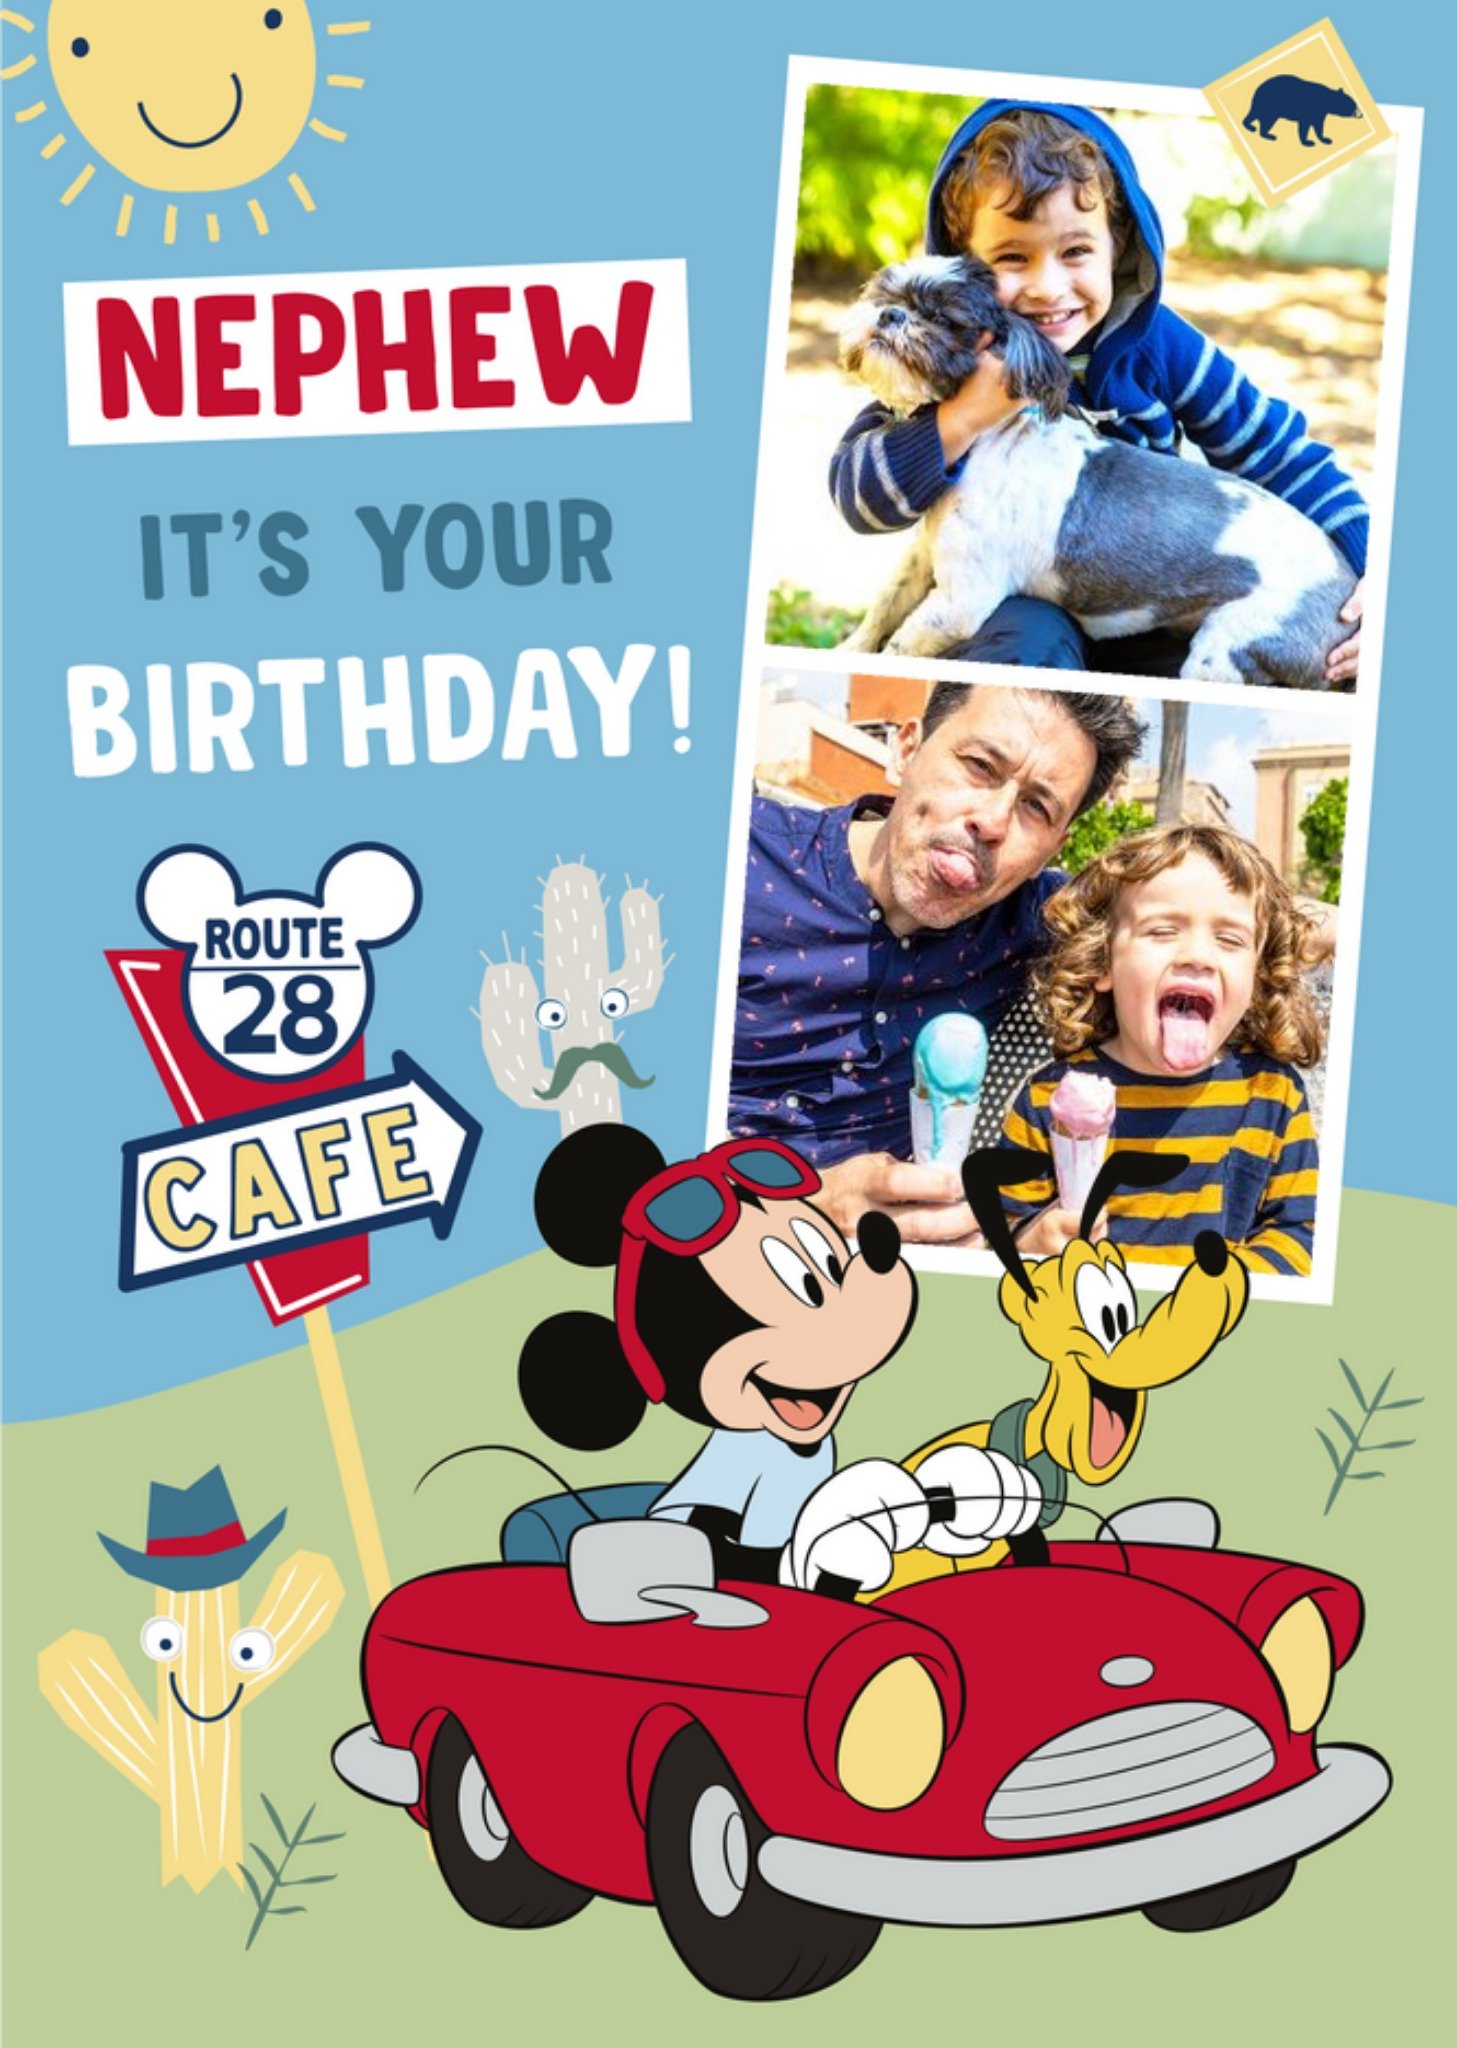 Disney Mickey Mouse And Pluto Photo Upload Nephew It's Your Birthday Card Ecard